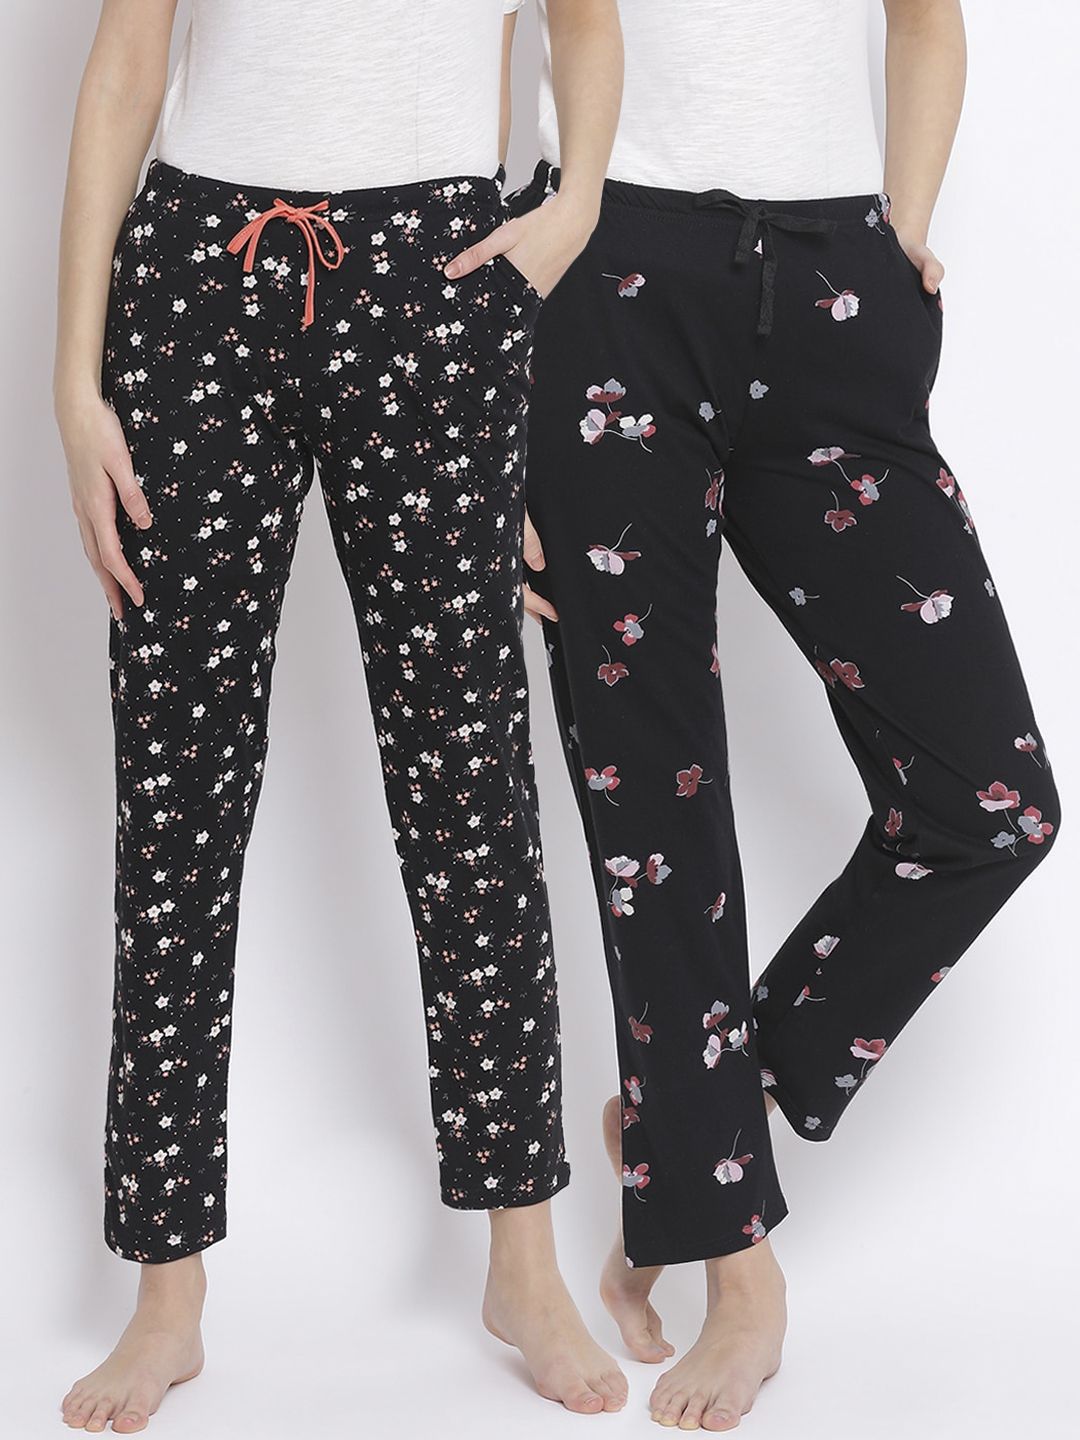 Kanvin Women Pack Of 2 Floral Printed Cotton Lounge Pants Price in India